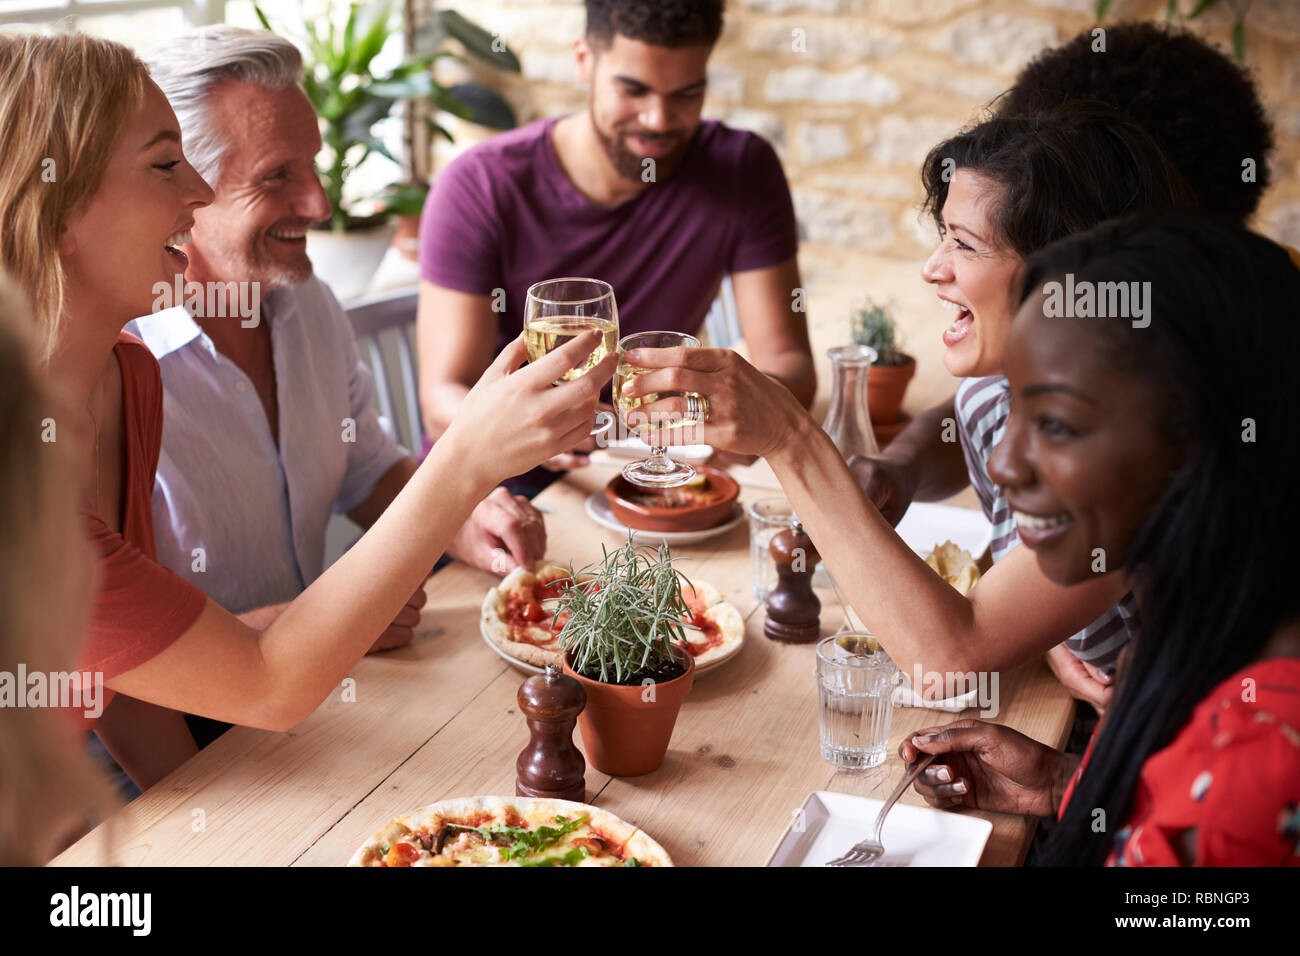 Friends laughing at a dining table in a cafe making a toast Stock Photo